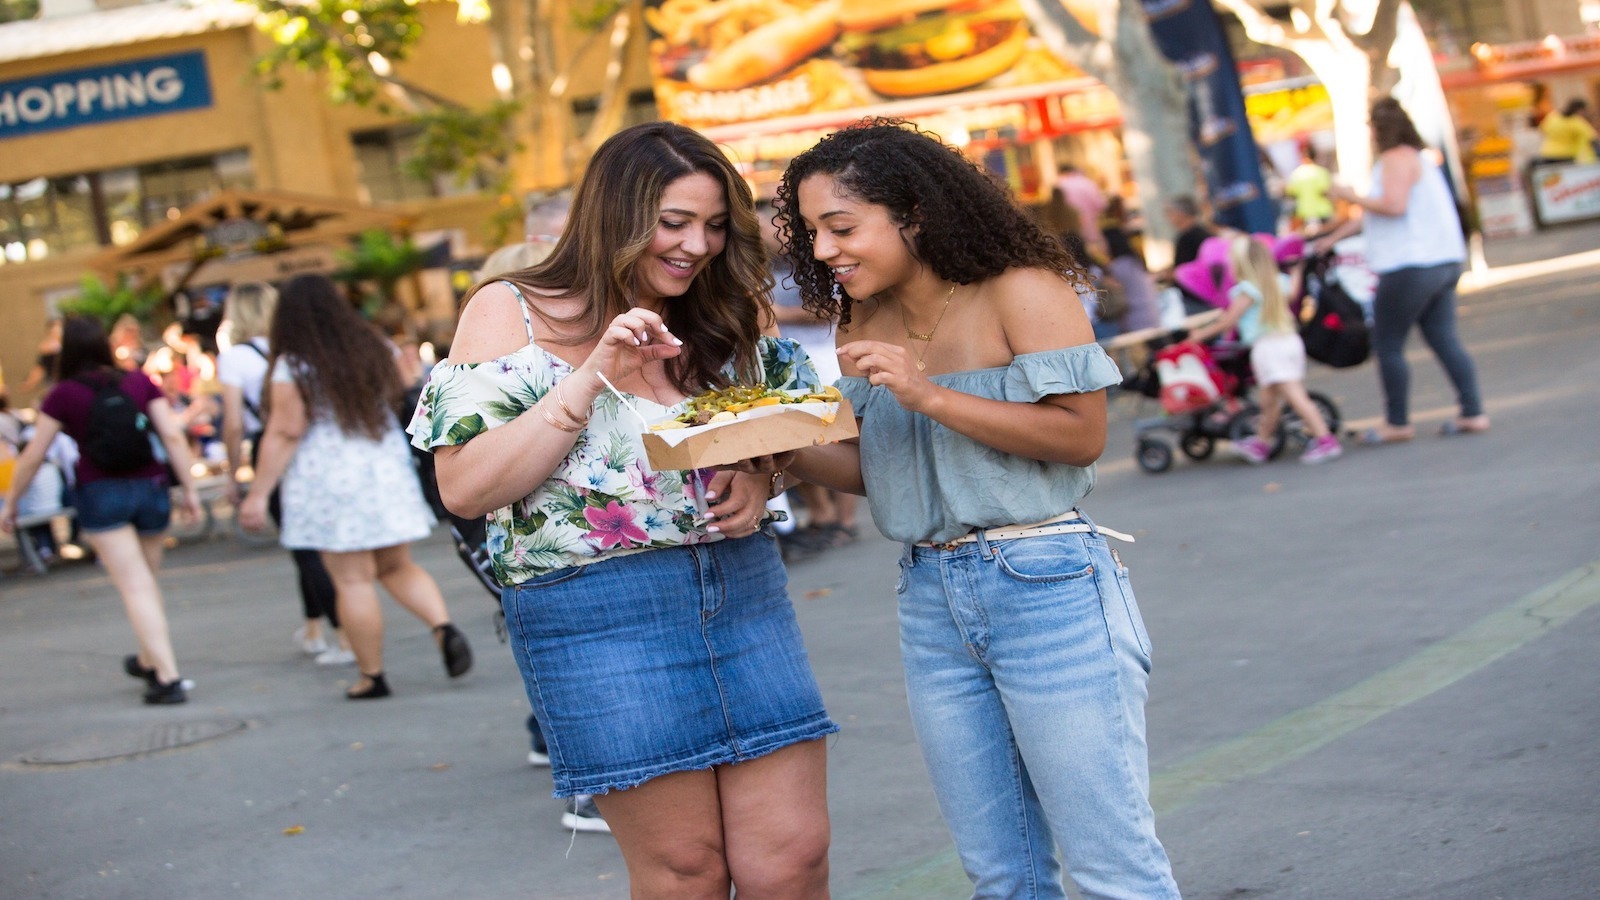 Two women share food at Alameda County Fair in East Bay.